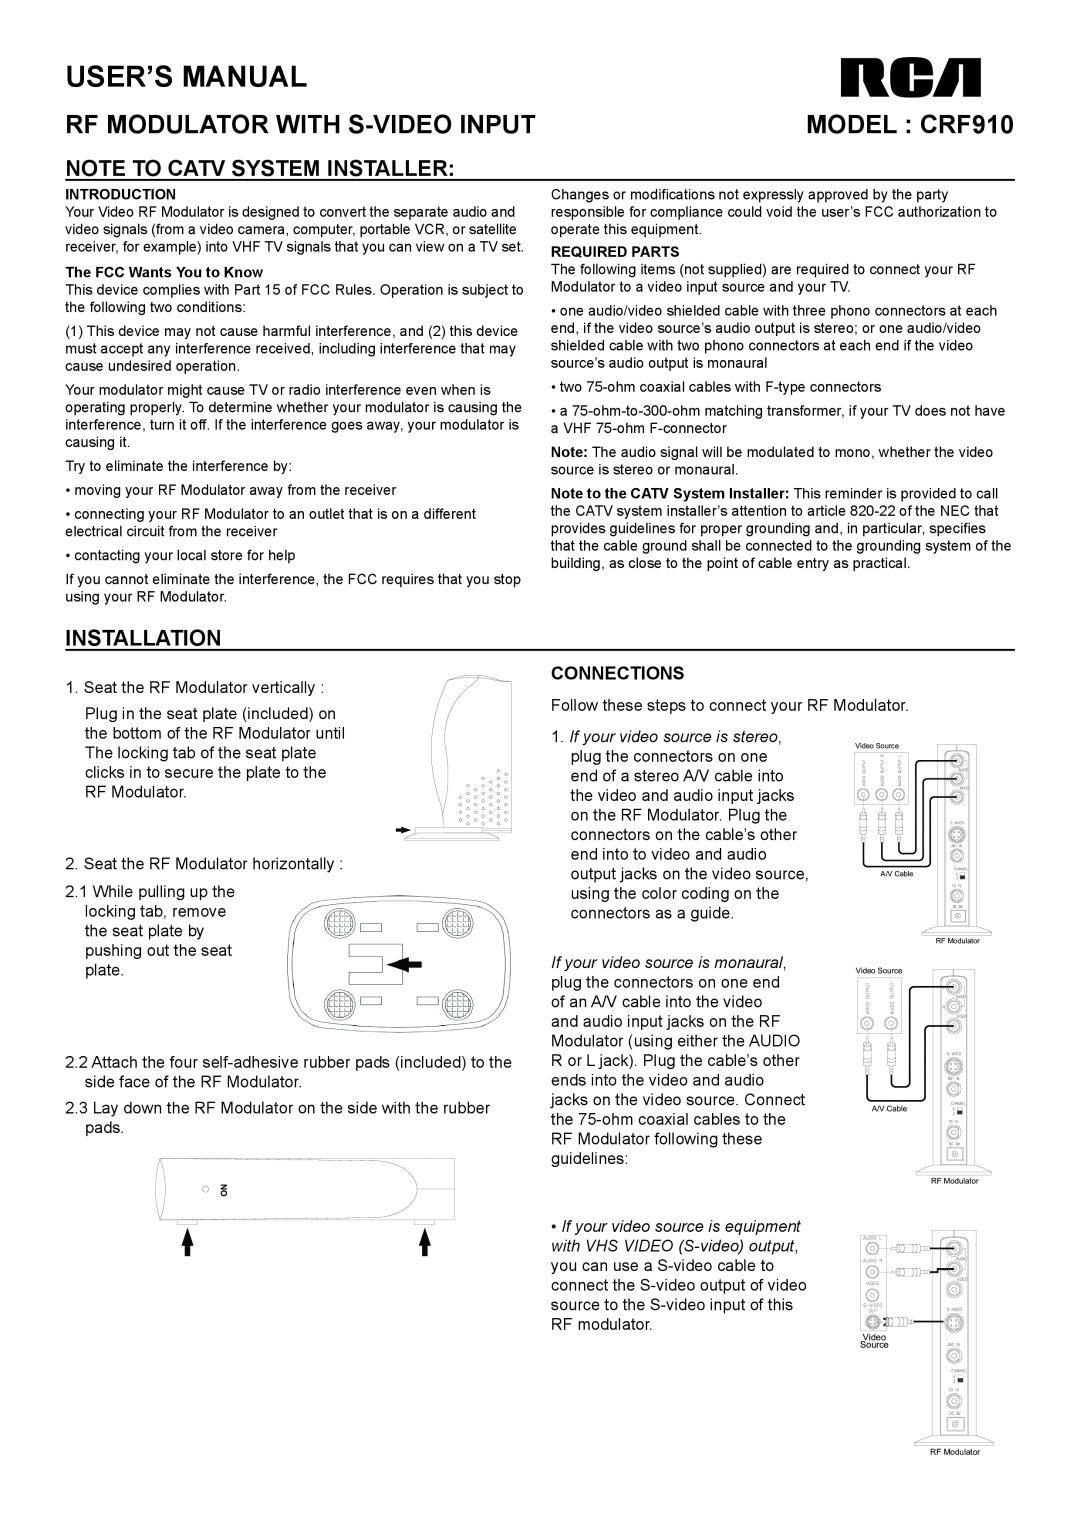 RCA CRF910 user manual Connections, If your video source is equipment, with VHS VIDEO S-videooutput, User’S Manual 